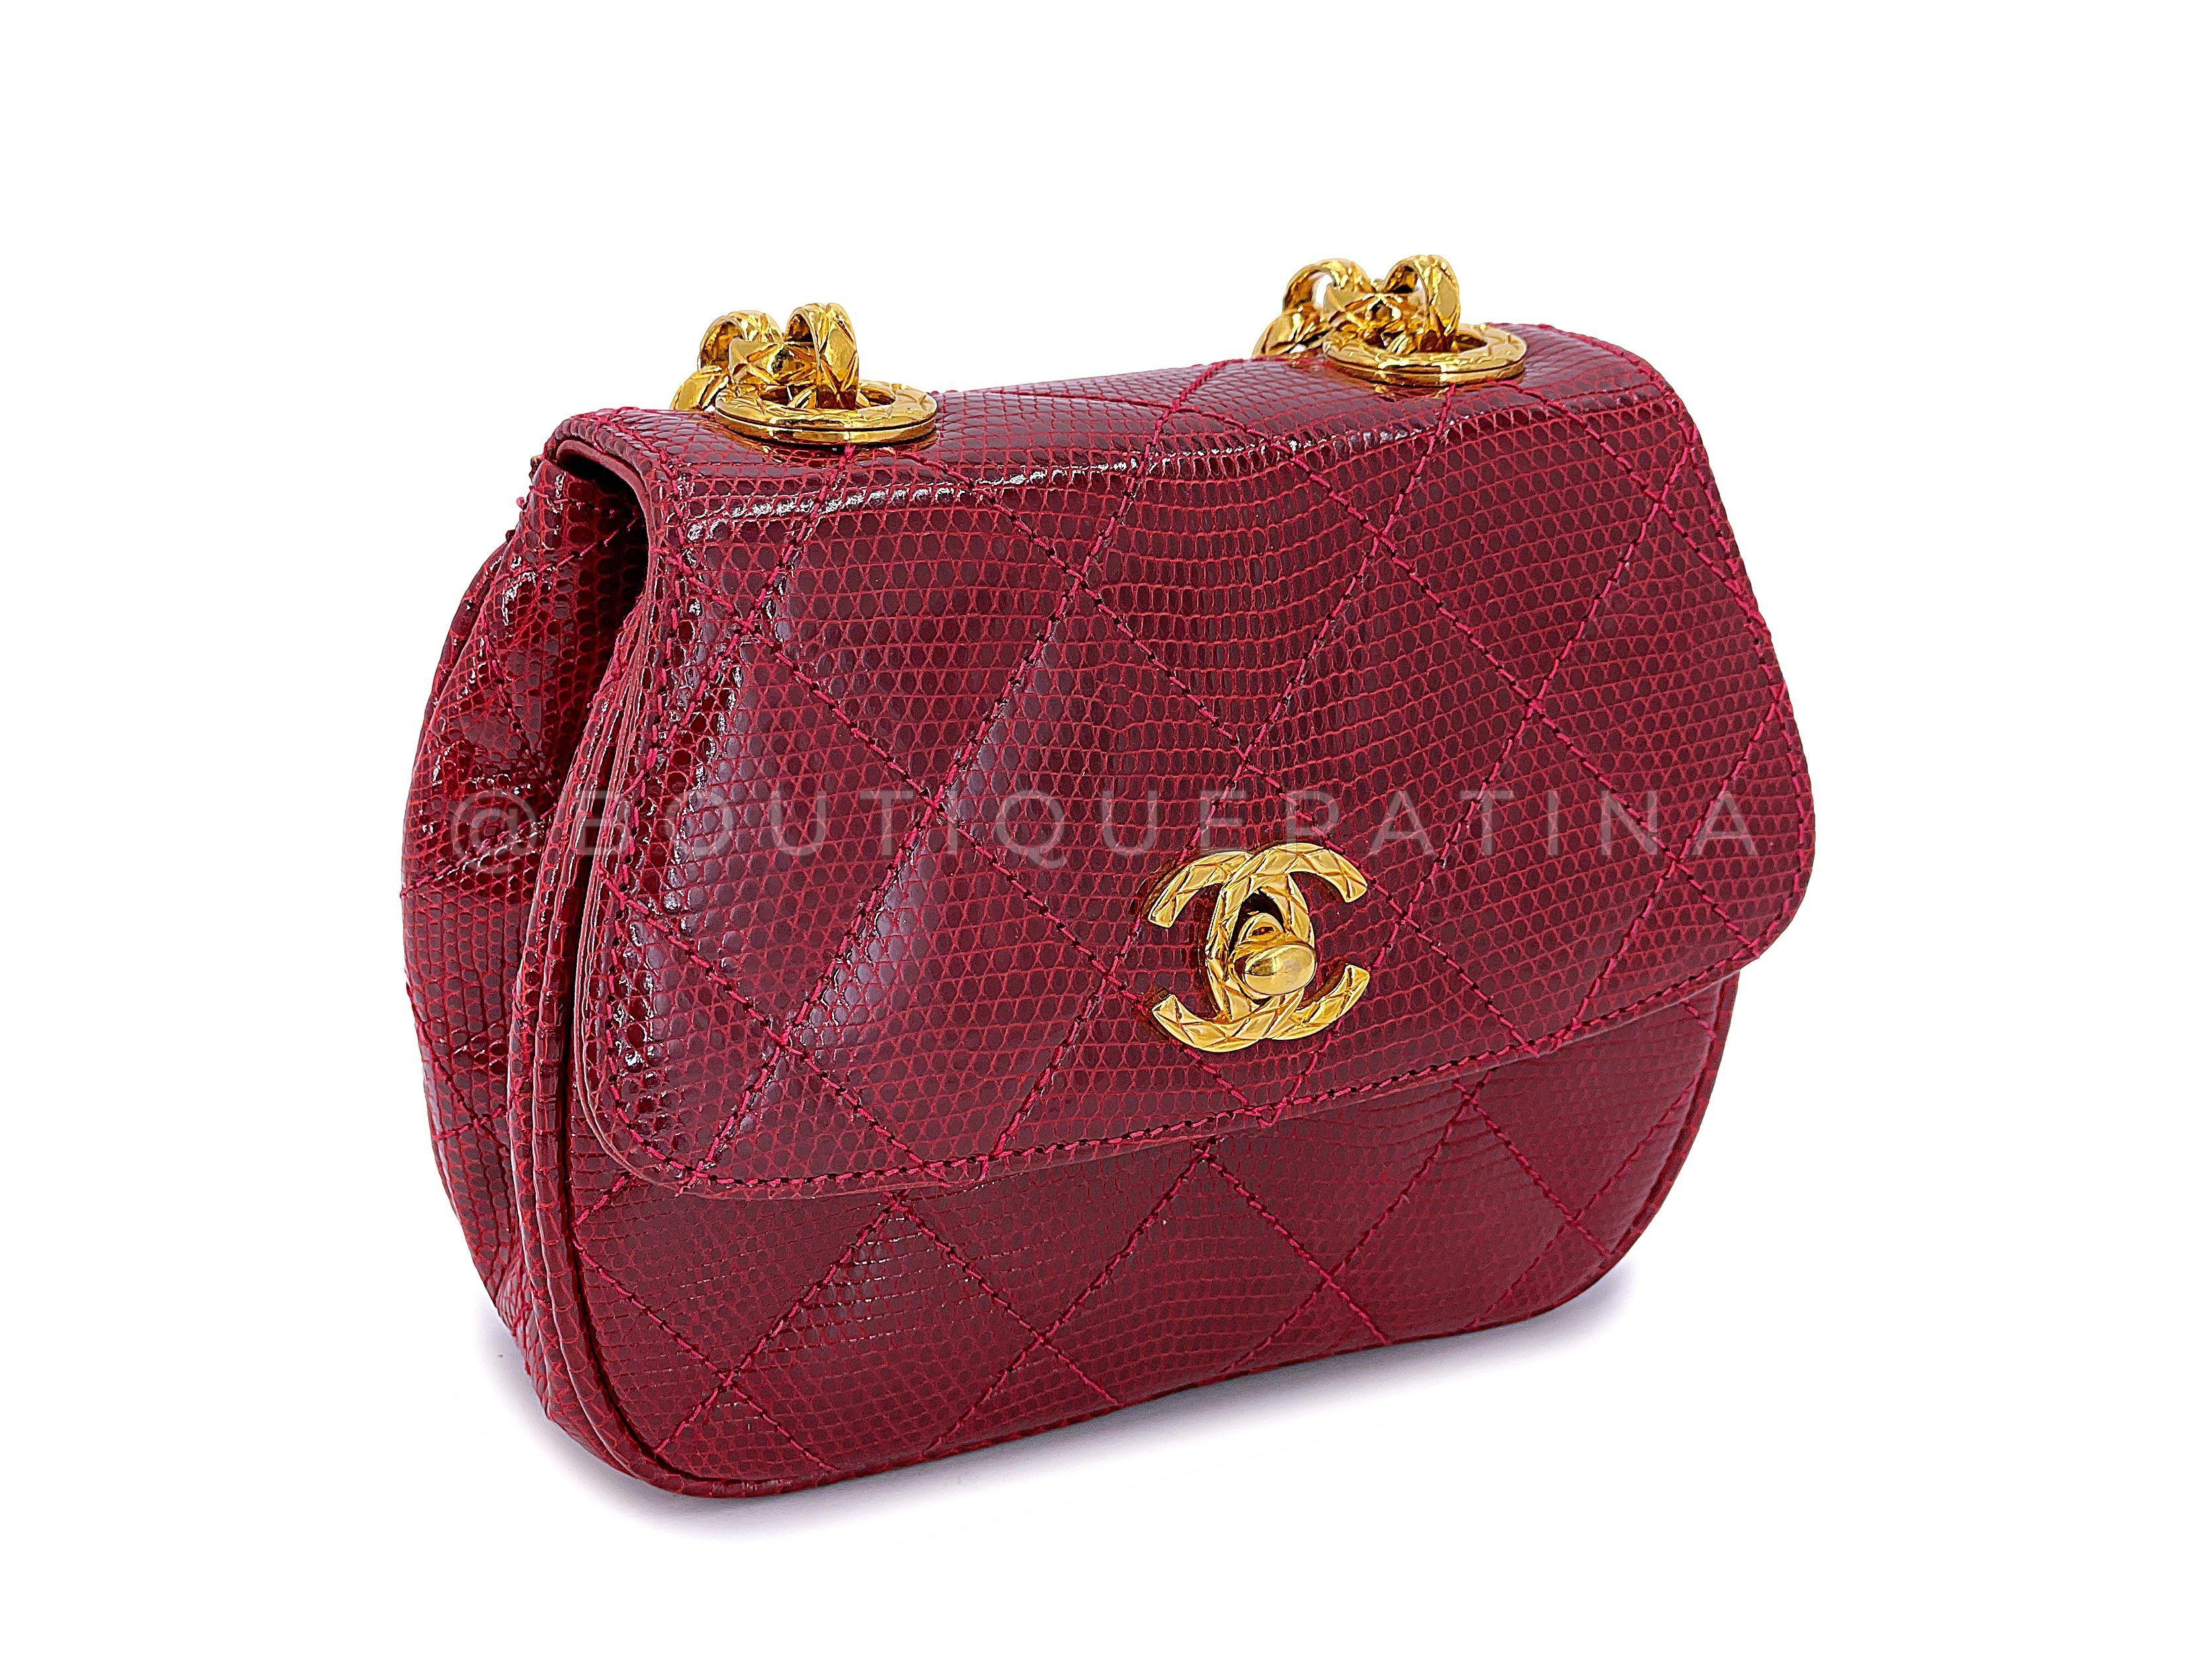 Rare Chanel 1980s Vintage Red Lizard Etched Chain Round Mini Flap Bag 67290 In Excellent Condition For Sale In Costa Mesa, CA